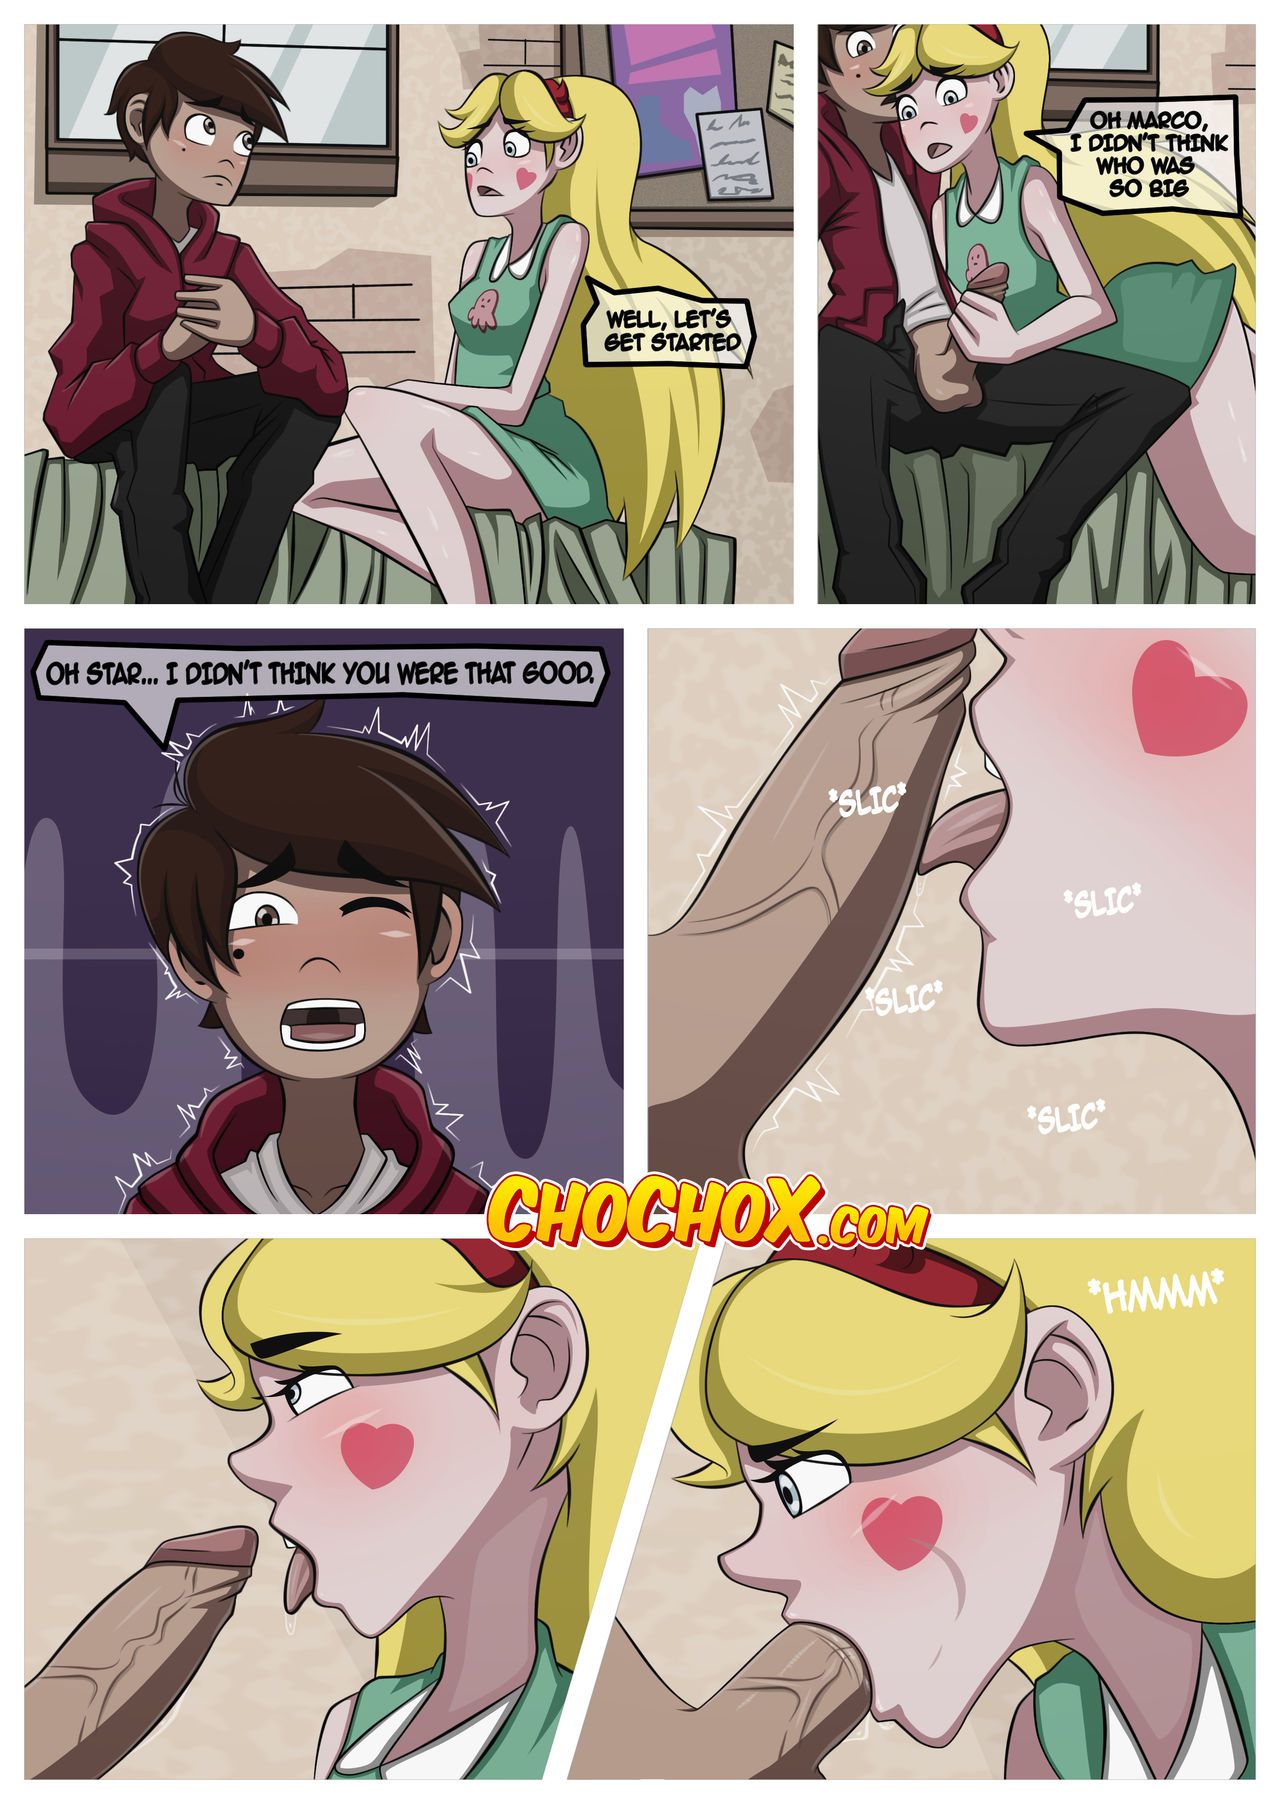 [Crock Comix] Hekapoo Plan’s - Sexberty 1 [ChoChoX] (Star Vs. The Forces of Evil) 14